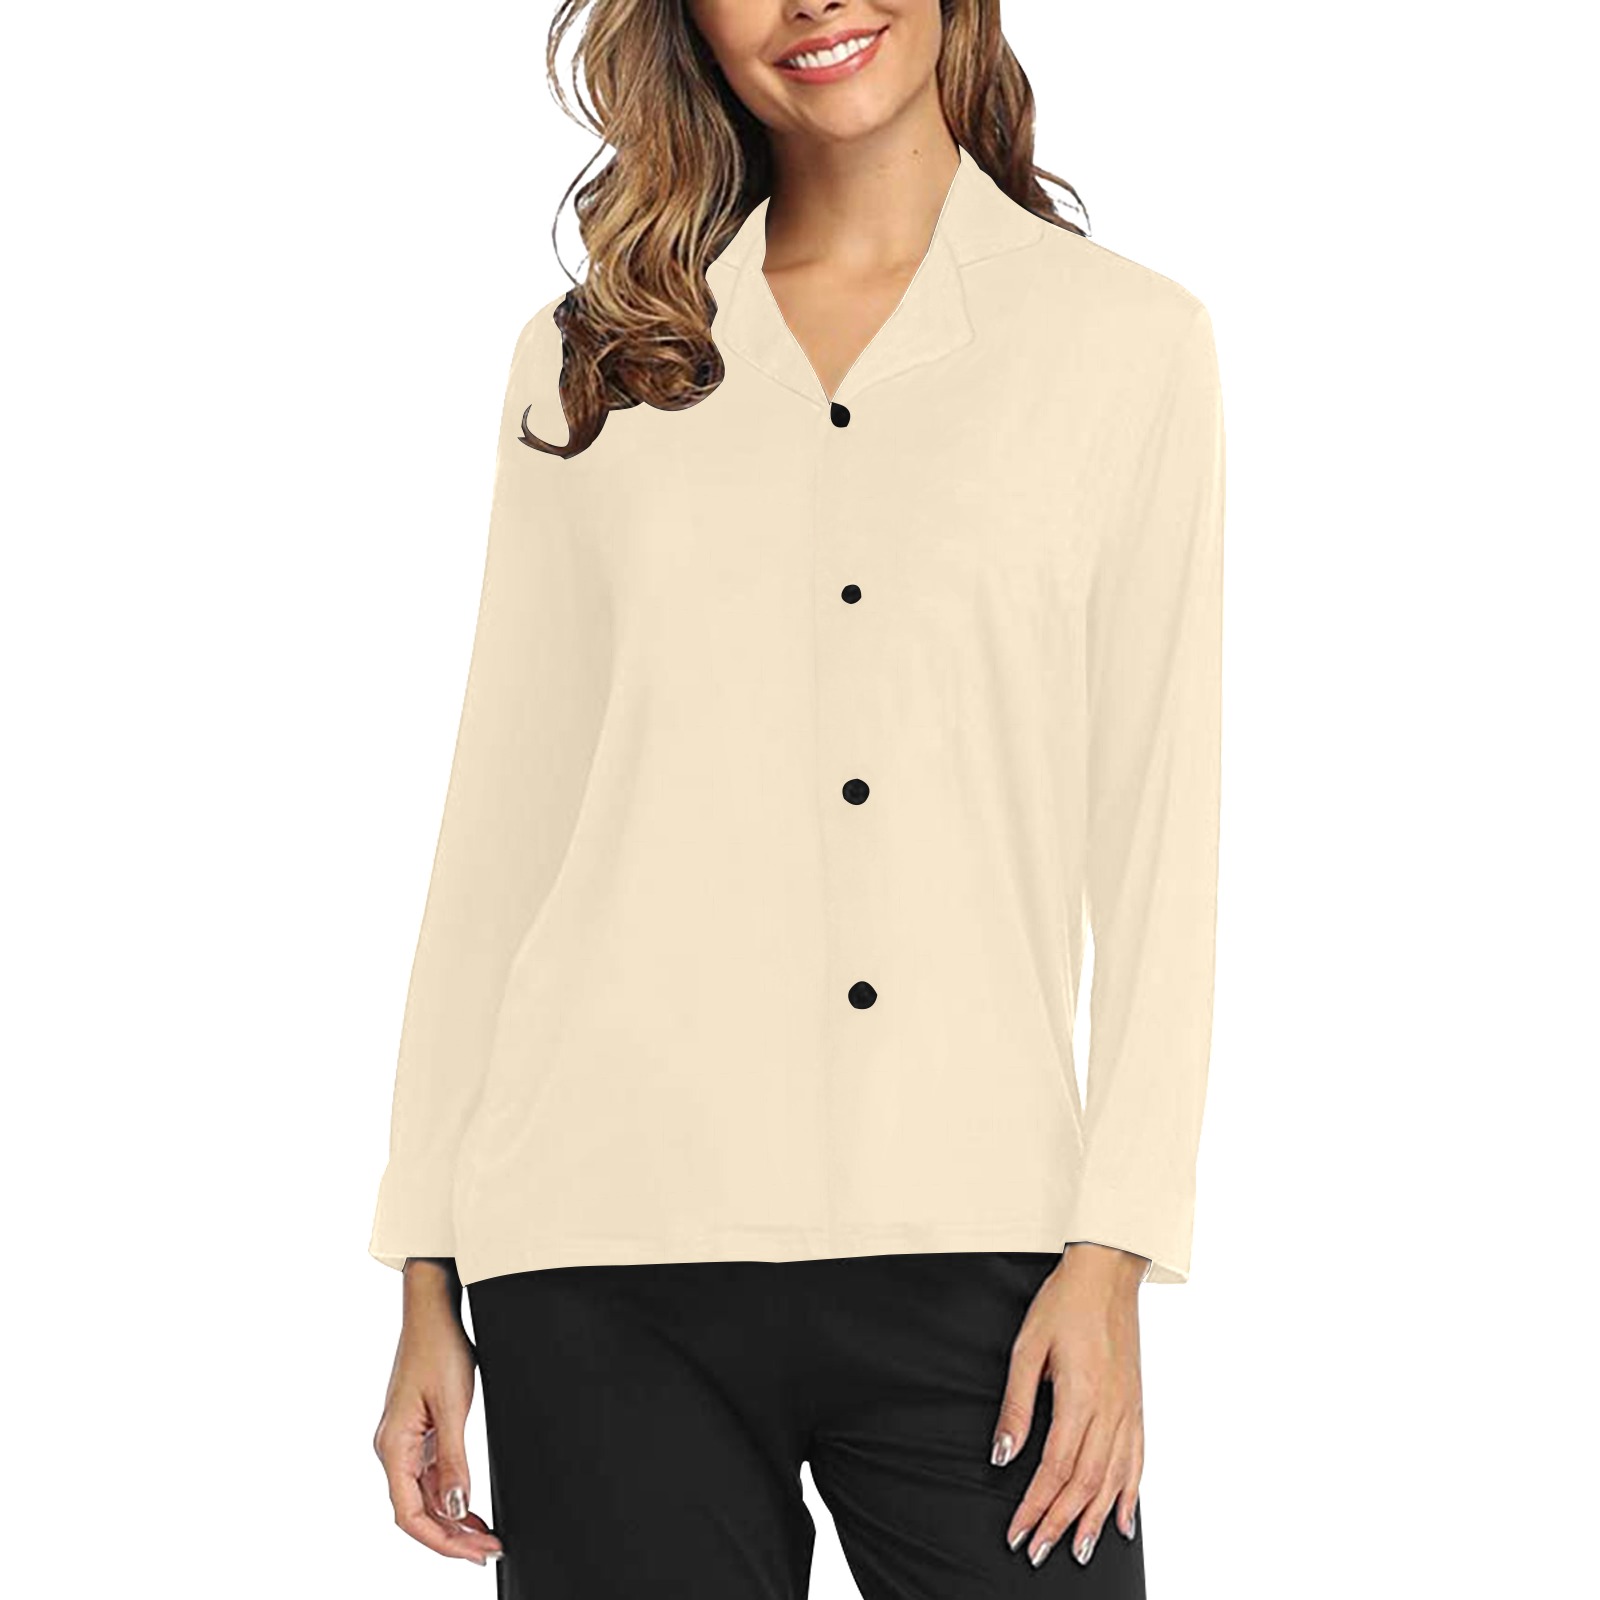 color blanched almond Women's Long Sleeve Pajama Shirt